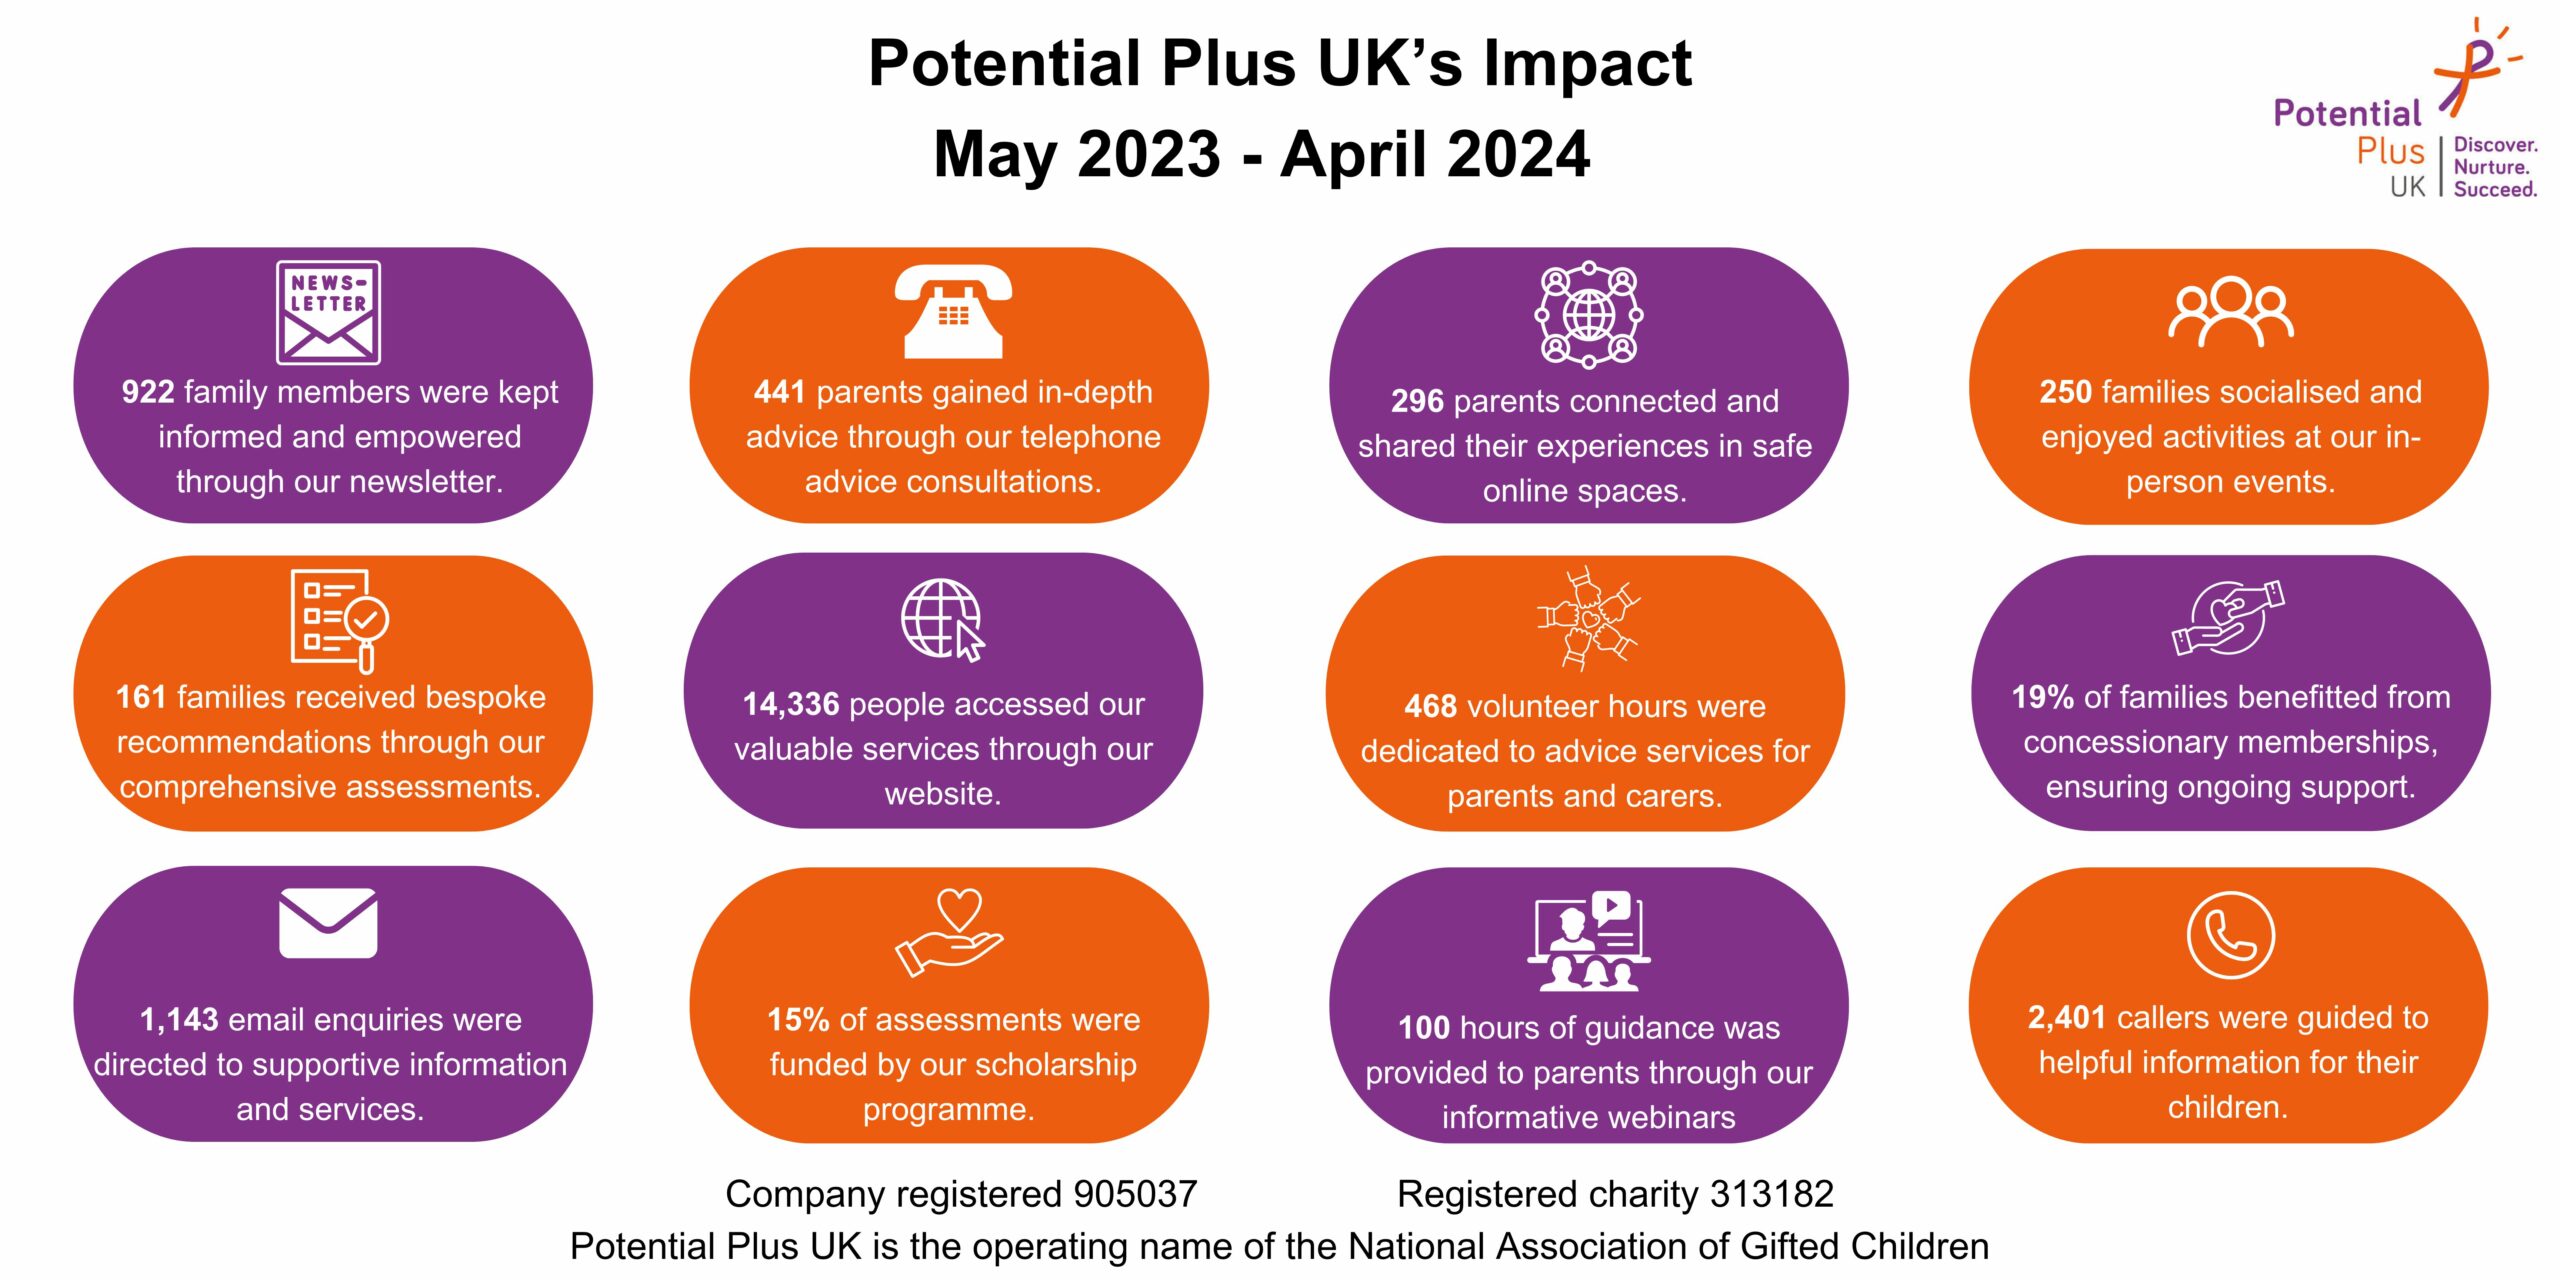 Information about how Potential Plus UKs services have reached people May 2023-April 2024 in graphic form